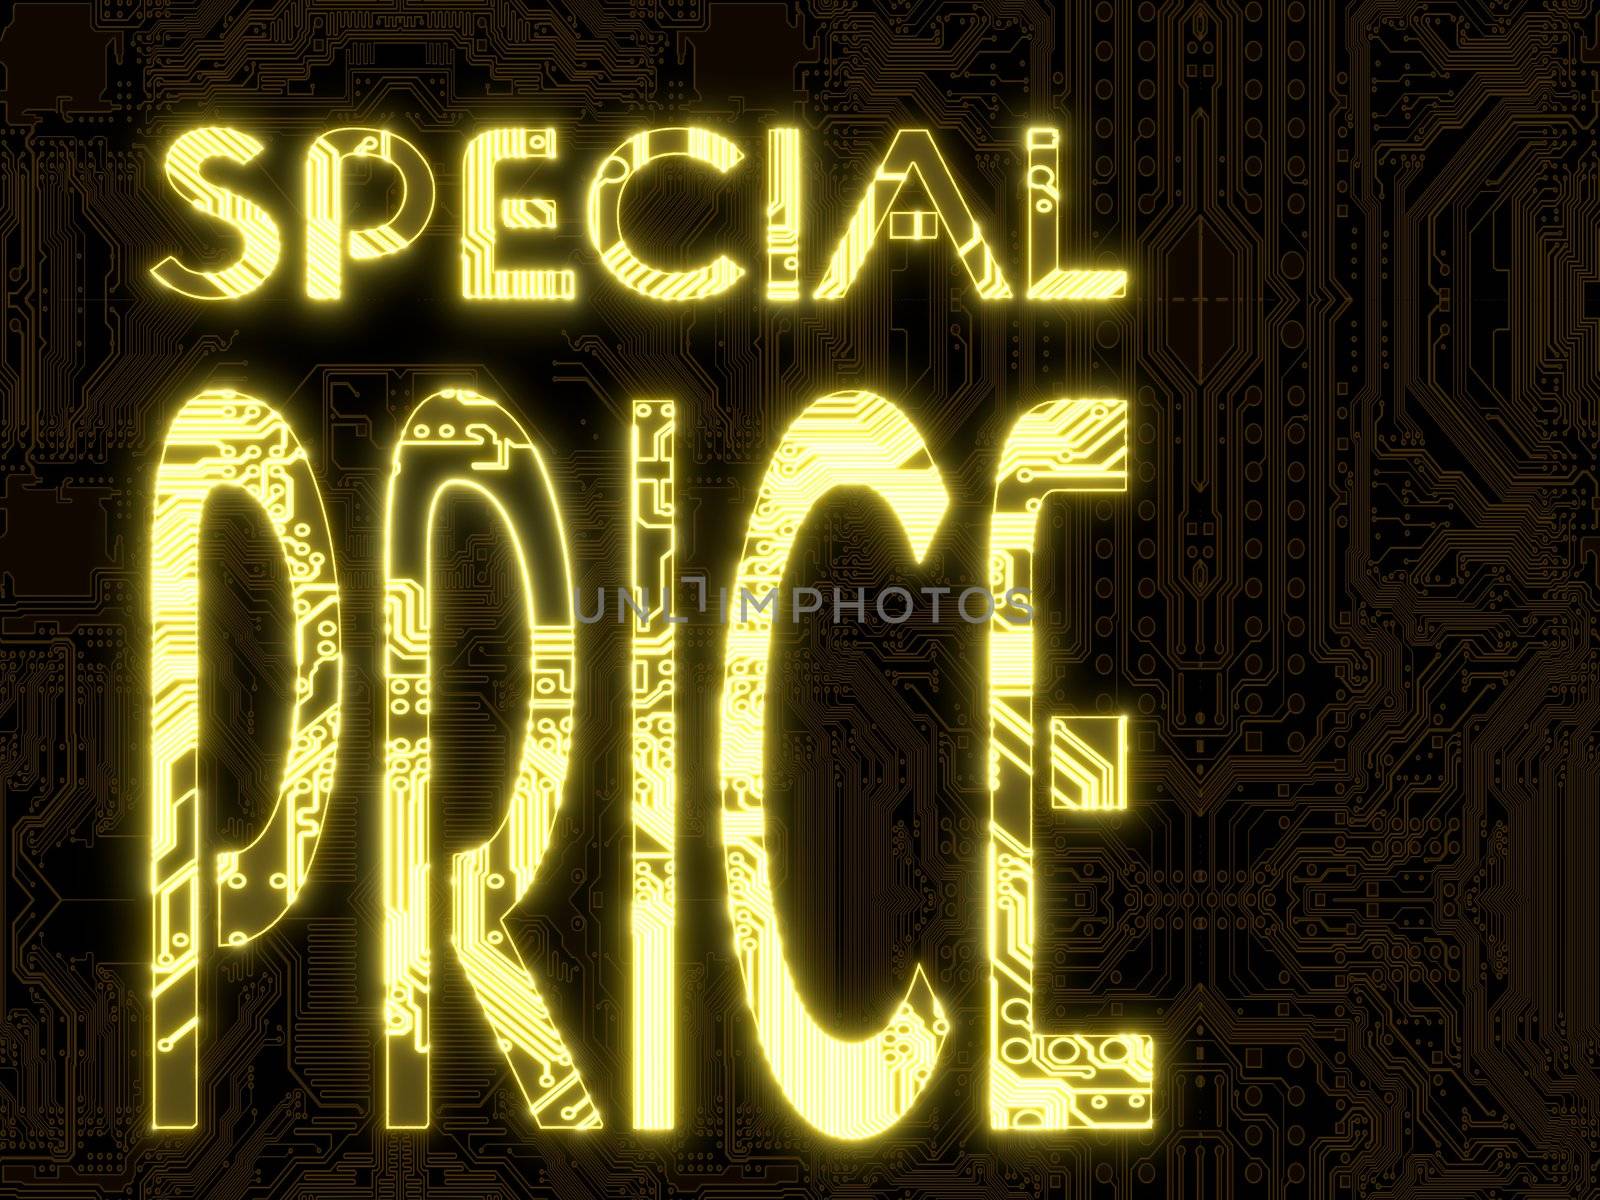 3D Graphic flare computer special price symbol in a dark background